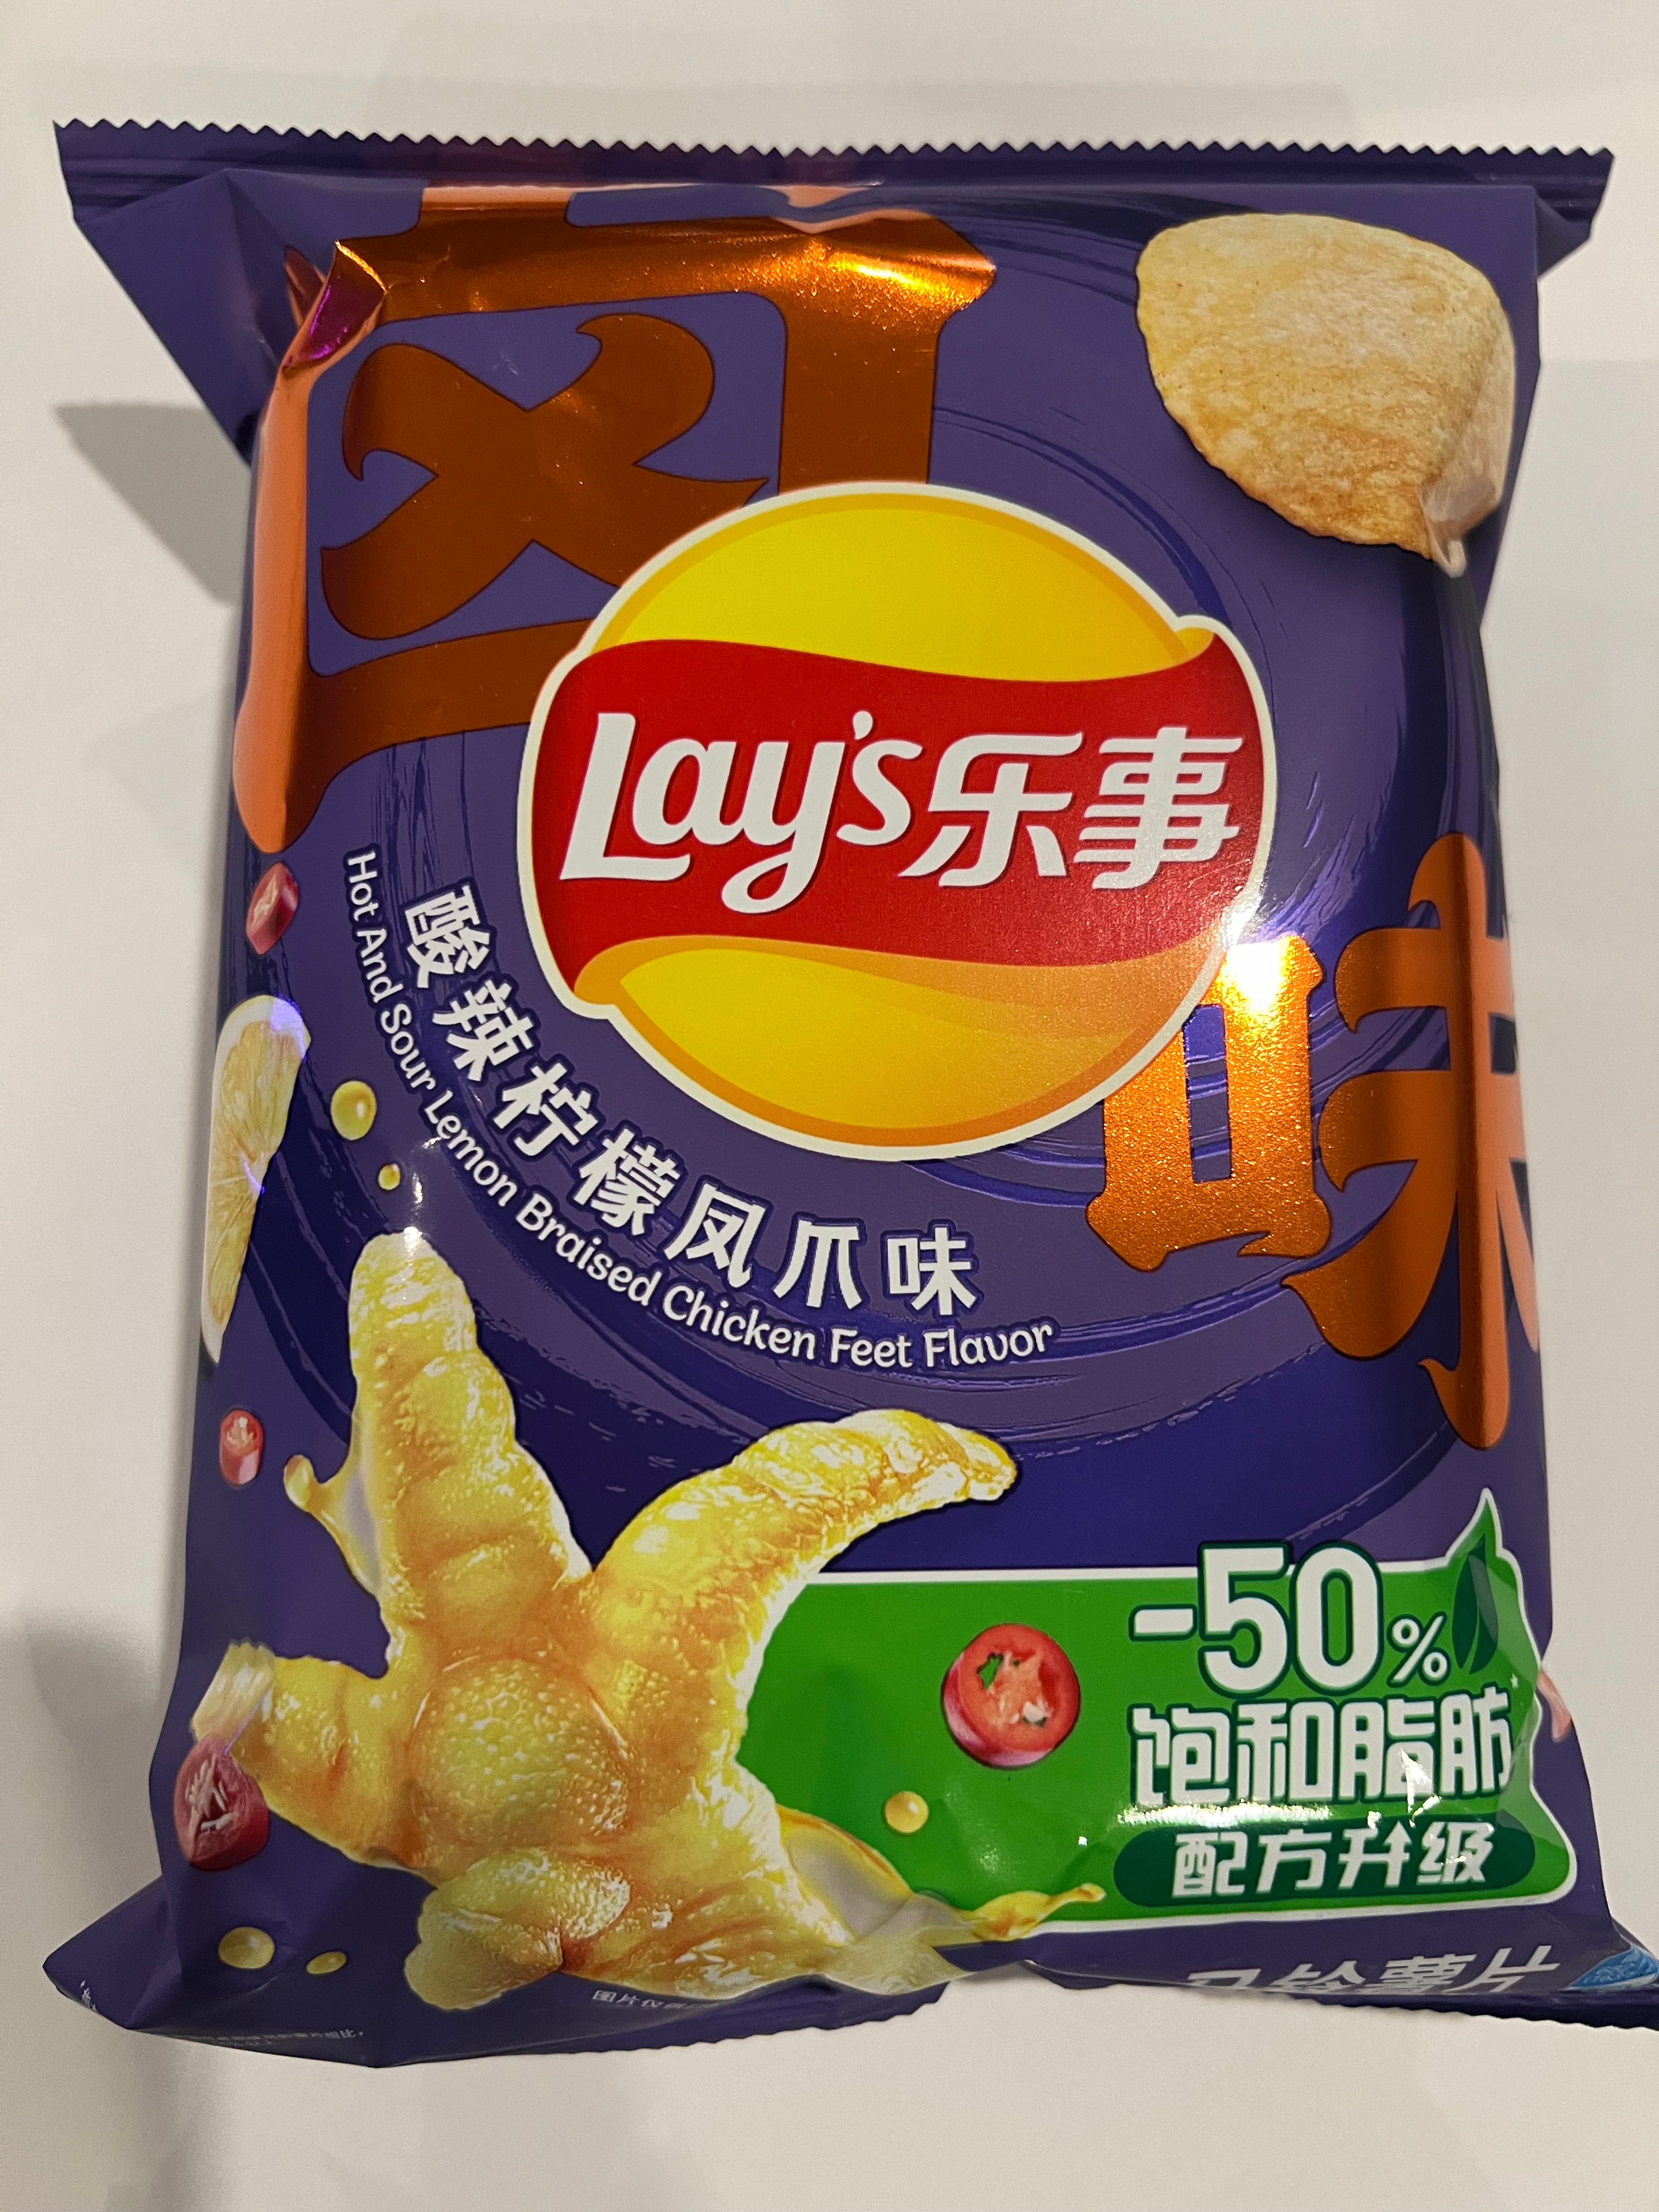 Lay's Hot and sour lemon braised chicken feet flavor